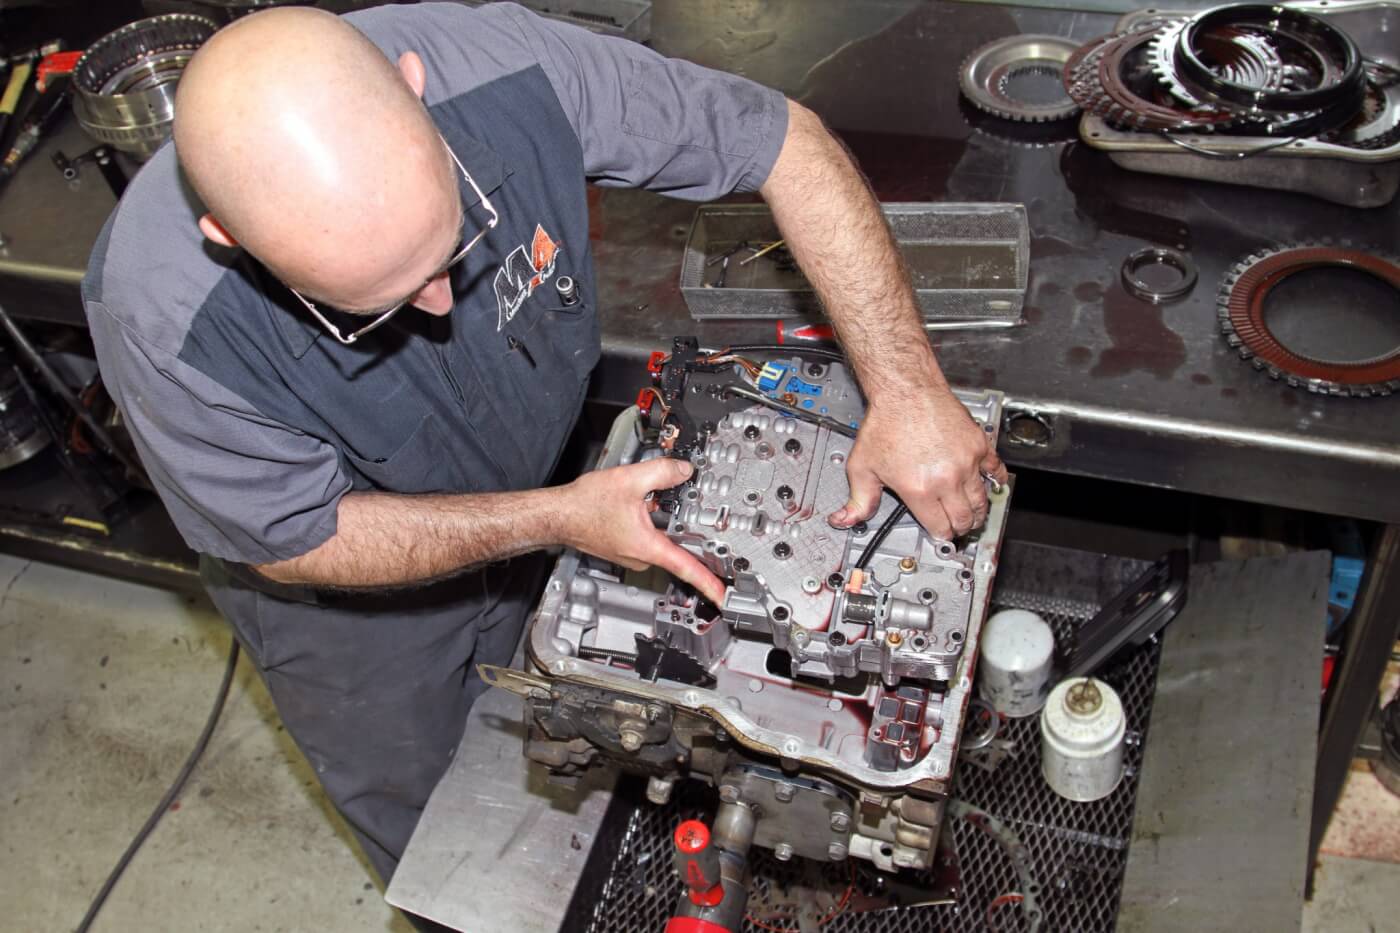 7. After rotating the transmission once again, Delo removes the valve body to give it a rebuild with the TransGo components to improve shift performance and control.